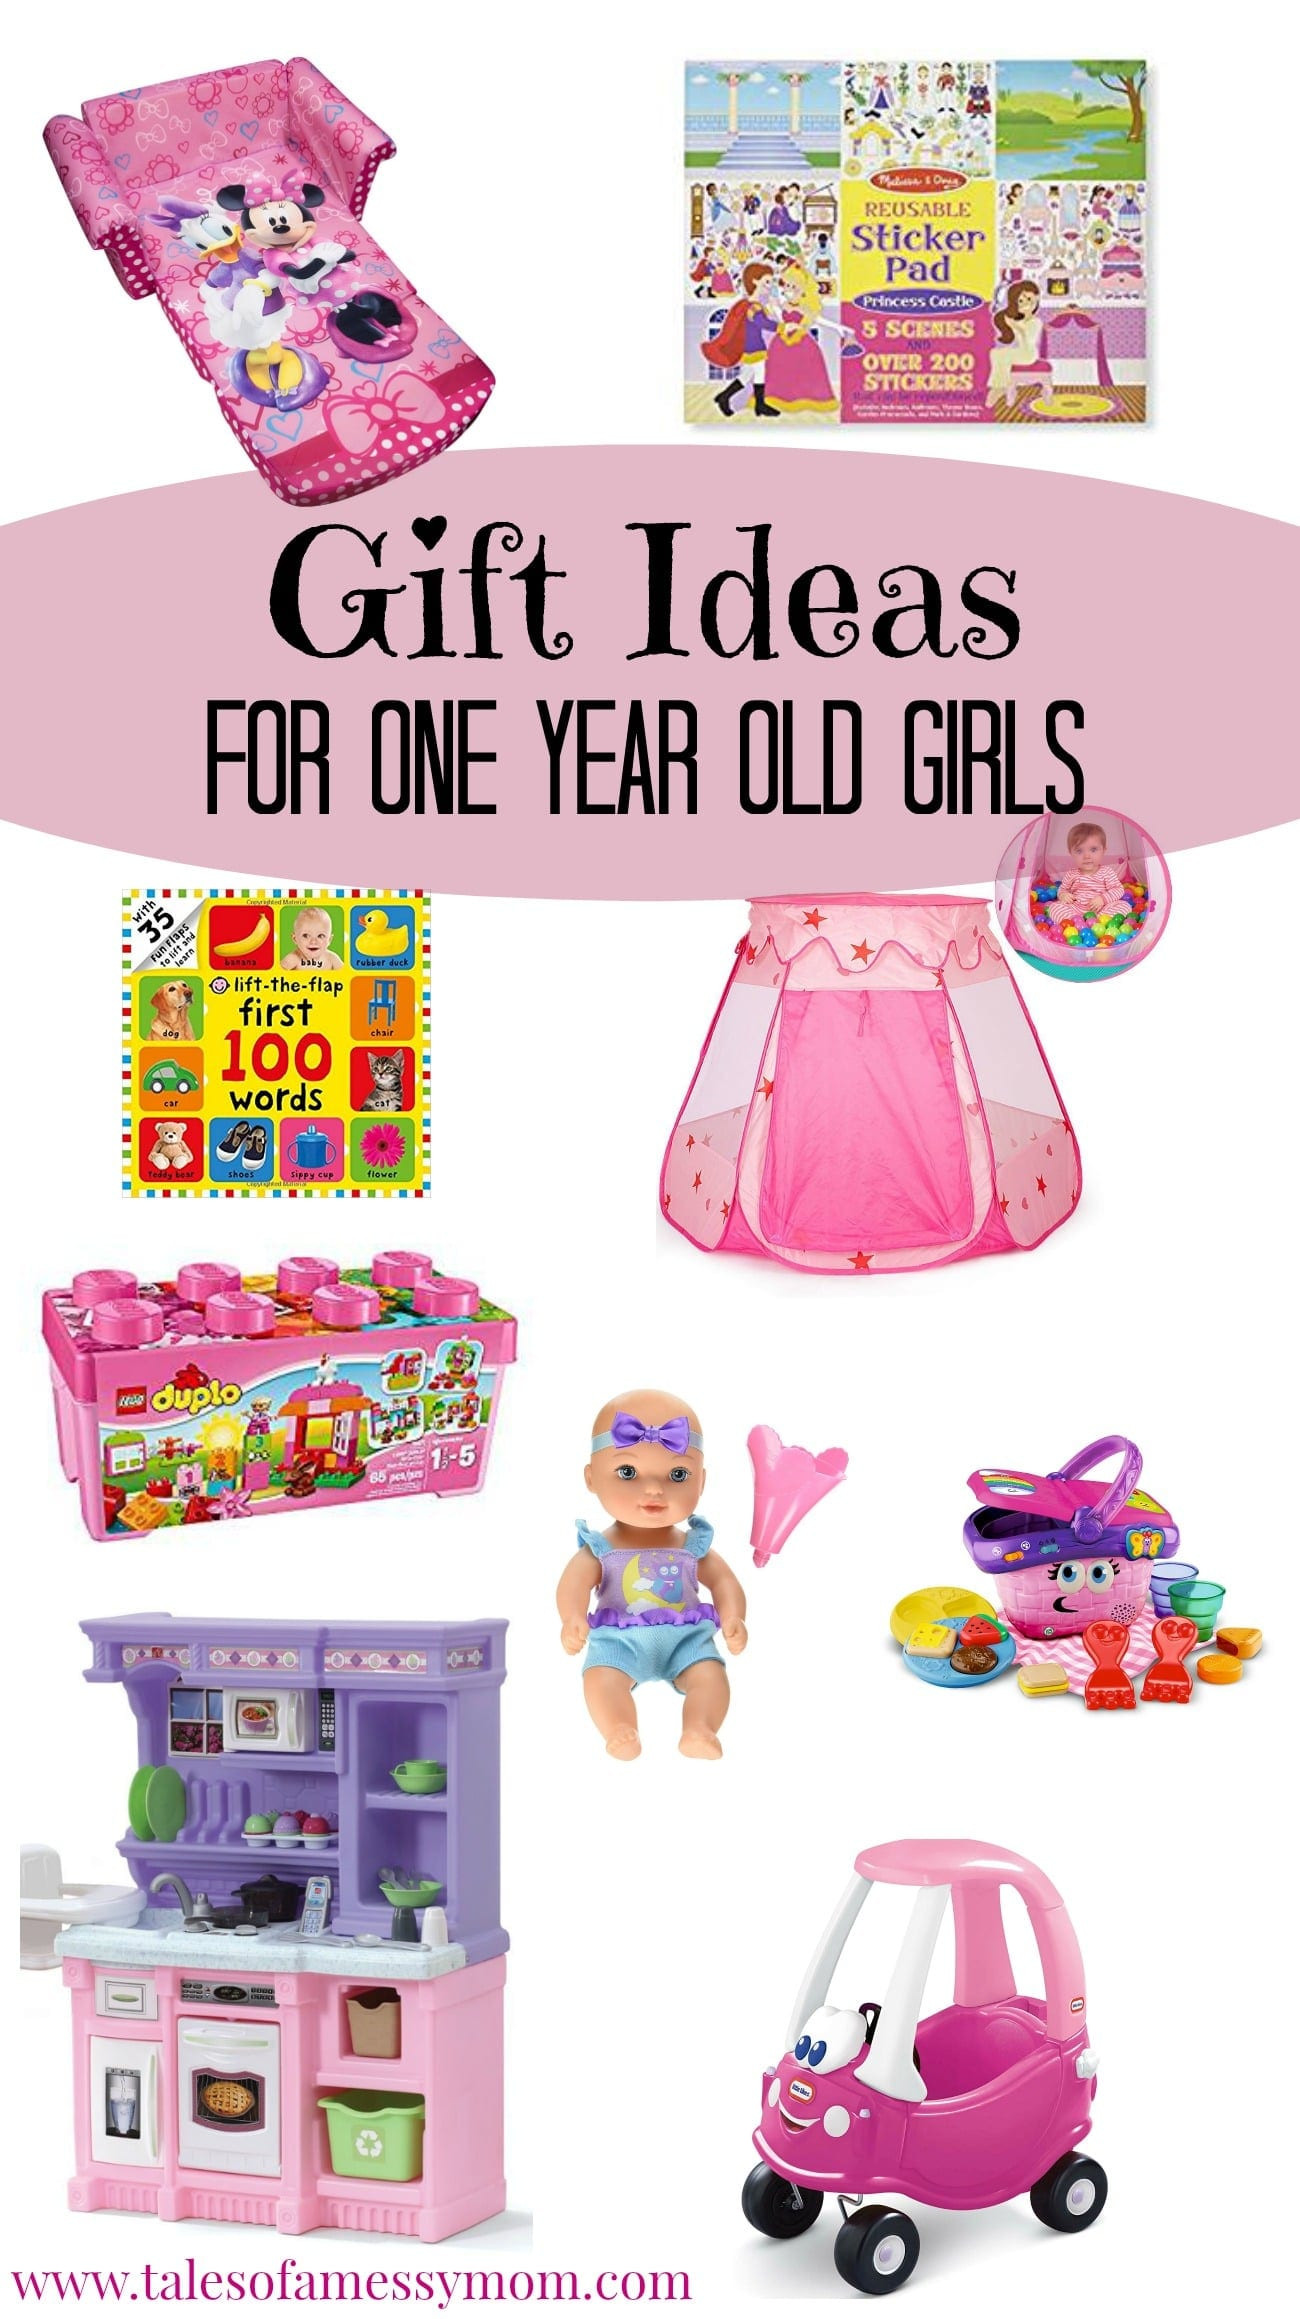 One Year Old Birthday Gifts
 Gift Ideas for e Year Old Girls Tales of a Messy Mom